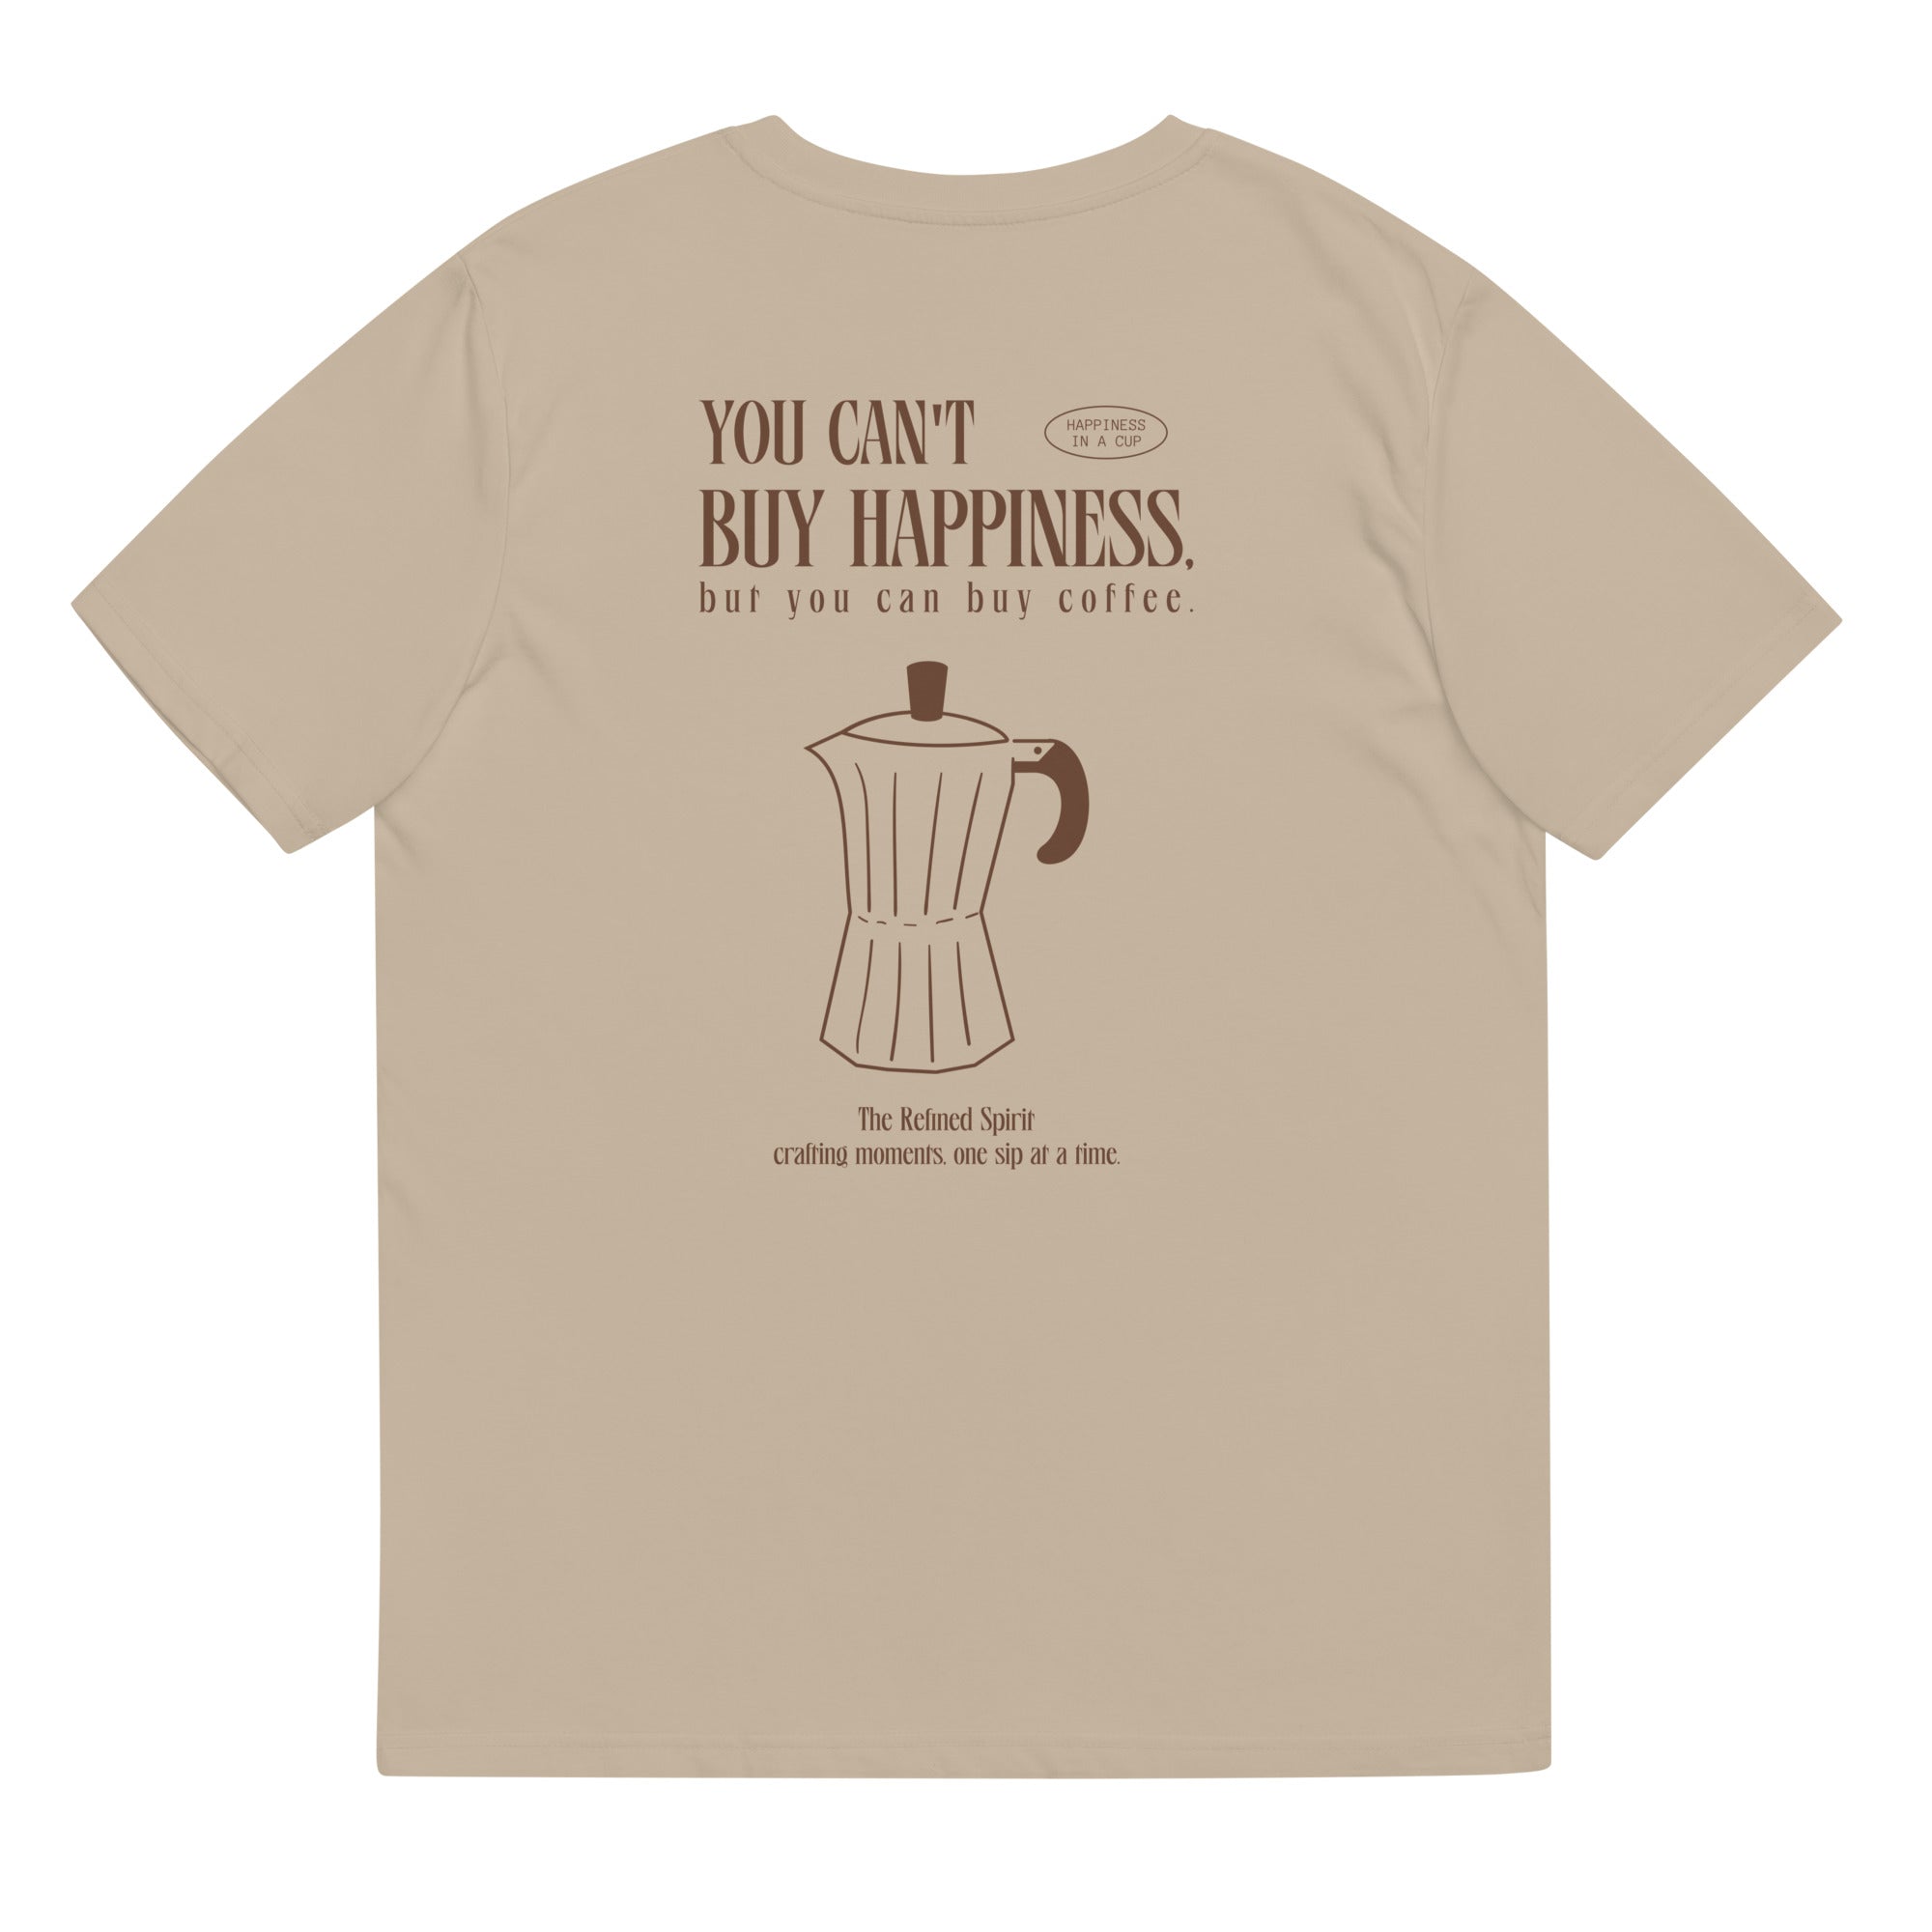 You can't buy happiness but you can buy coffe - Organic T-shirt - The Refined Spirit